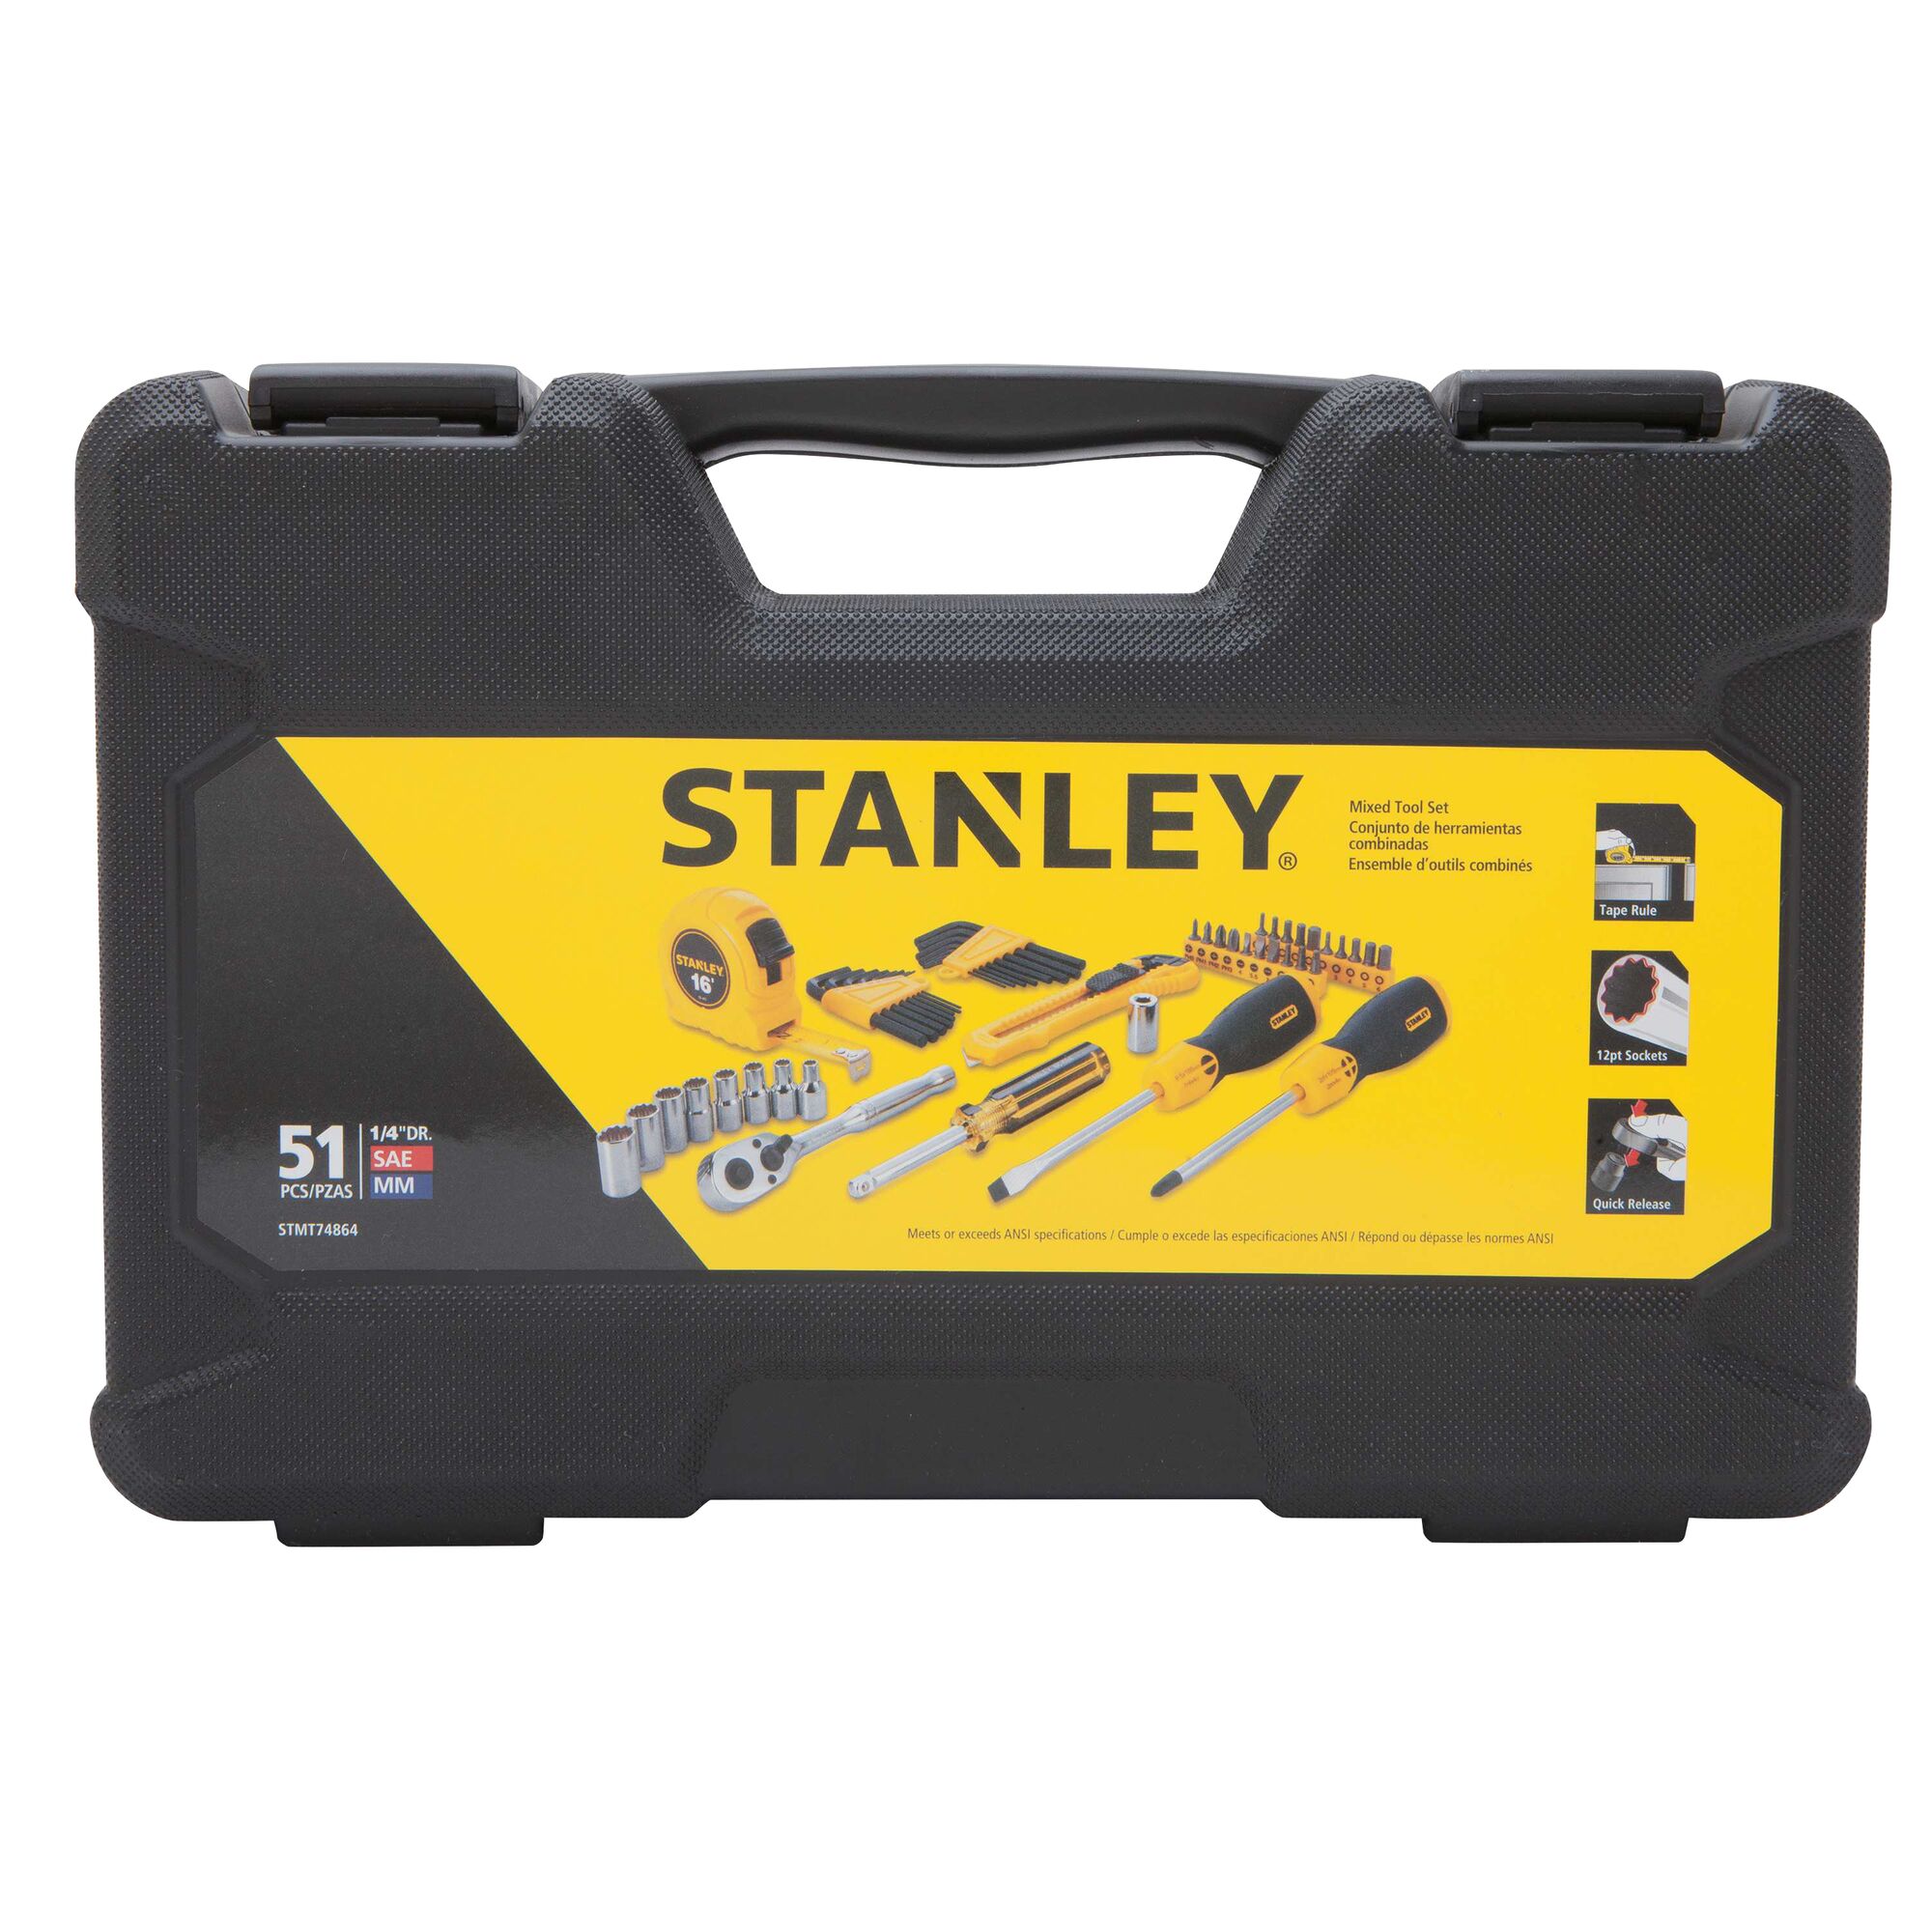 51 pc Mixed Tool Set | STANLEY